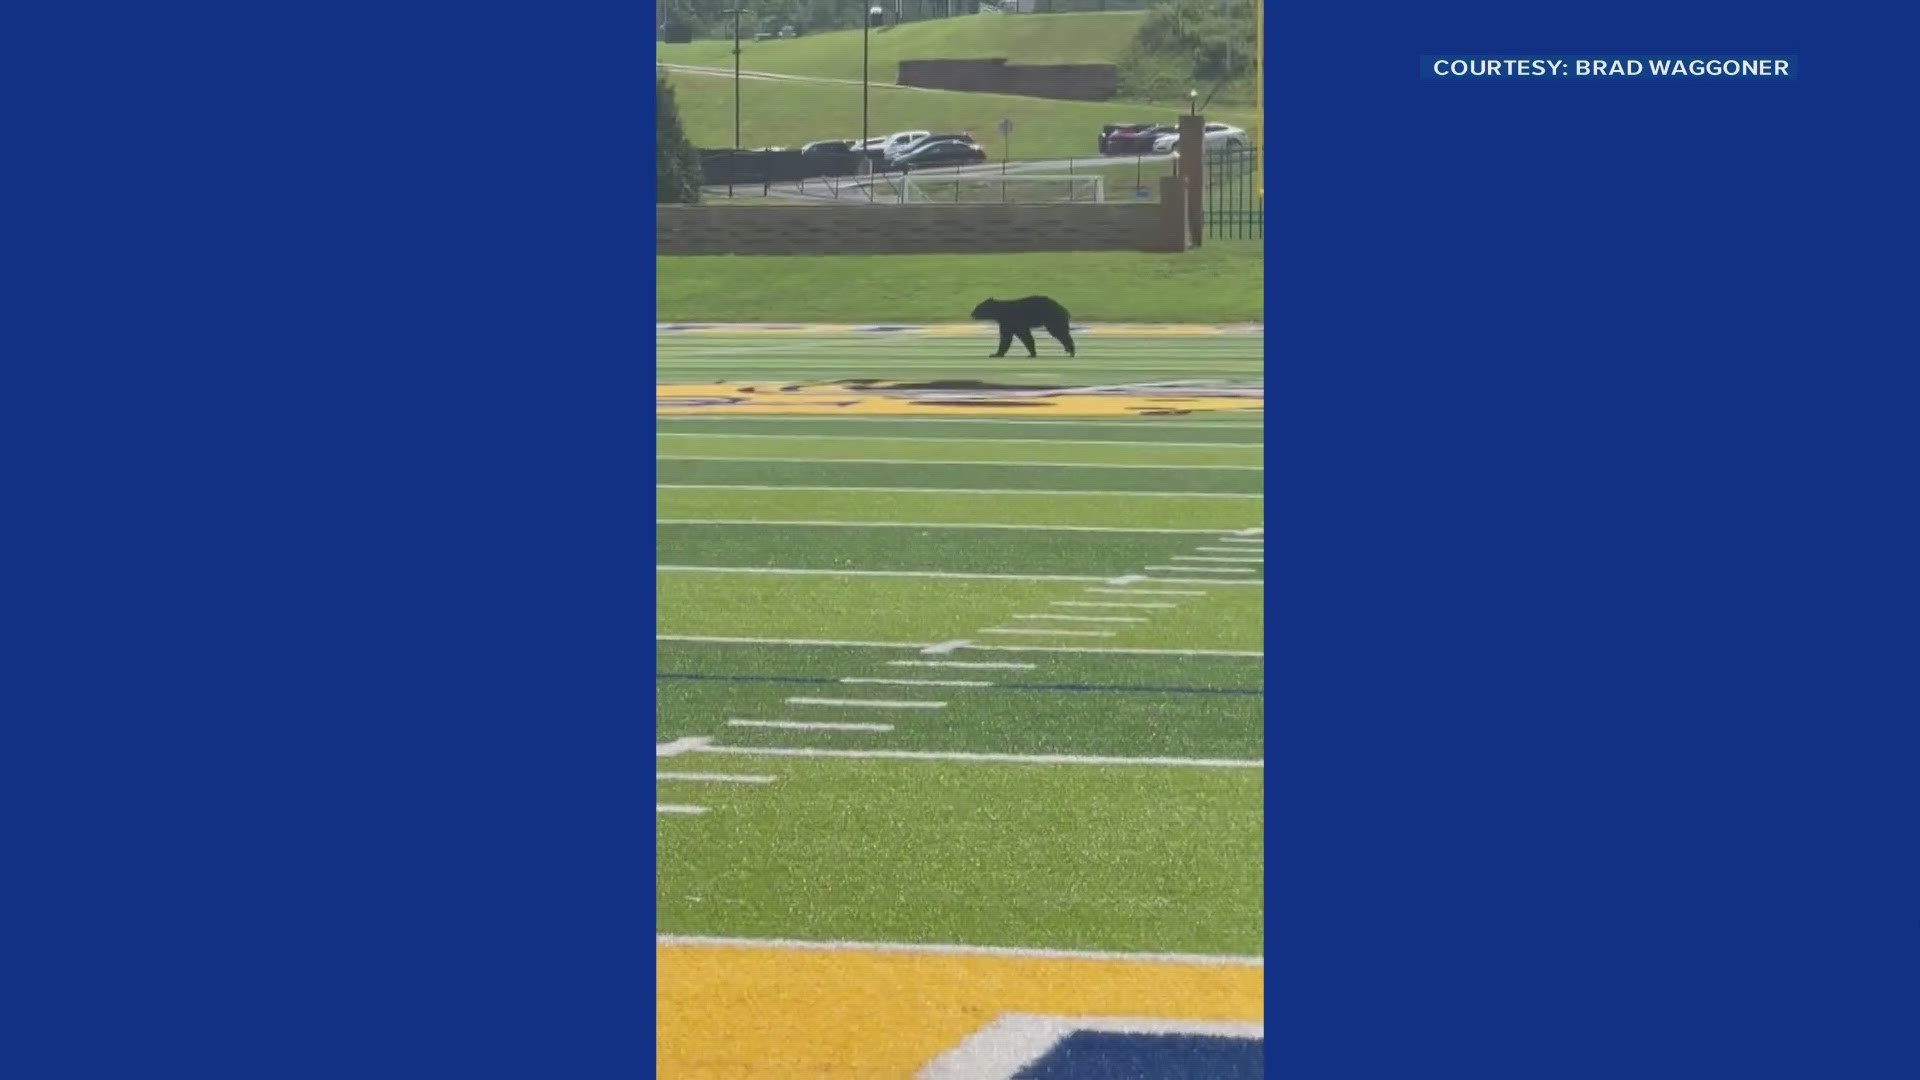 The Highlanders were about to take the field to practice when they saw the animal run across their field.